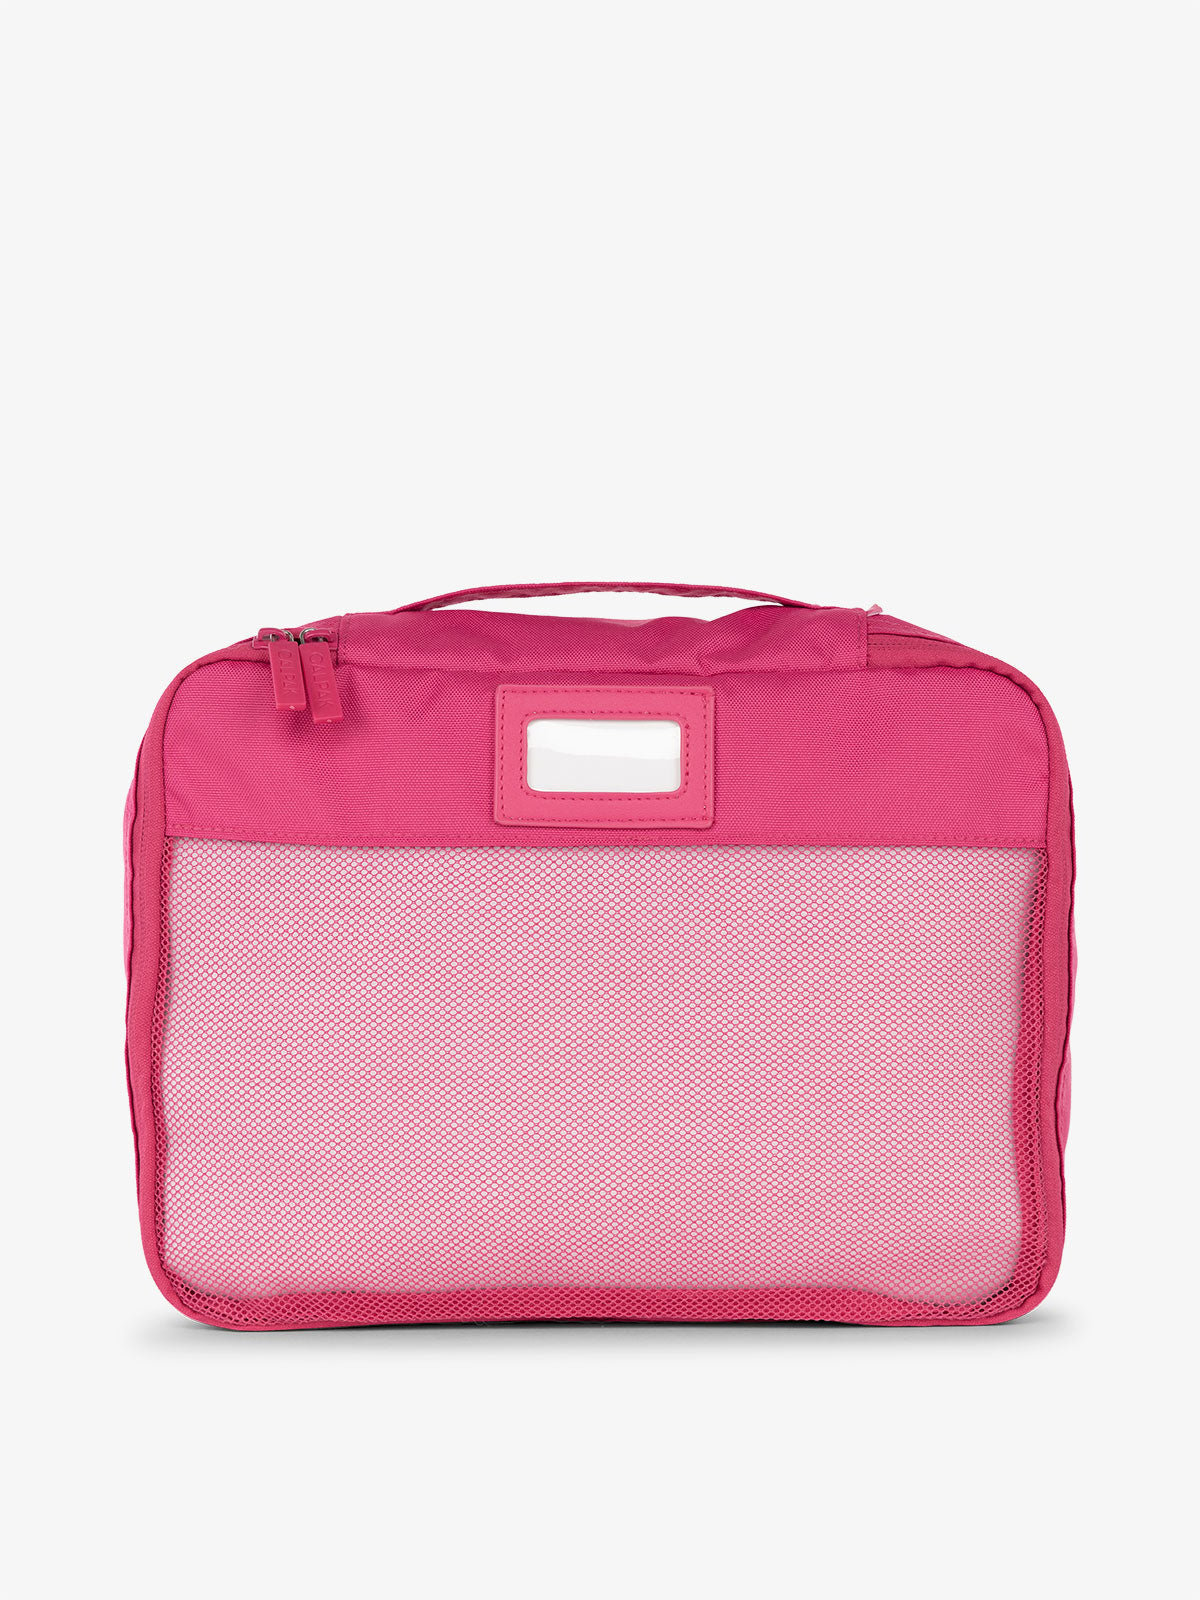 CALPAK luggage packing cubes for clothes with mesh front and label in dragonfruit pink